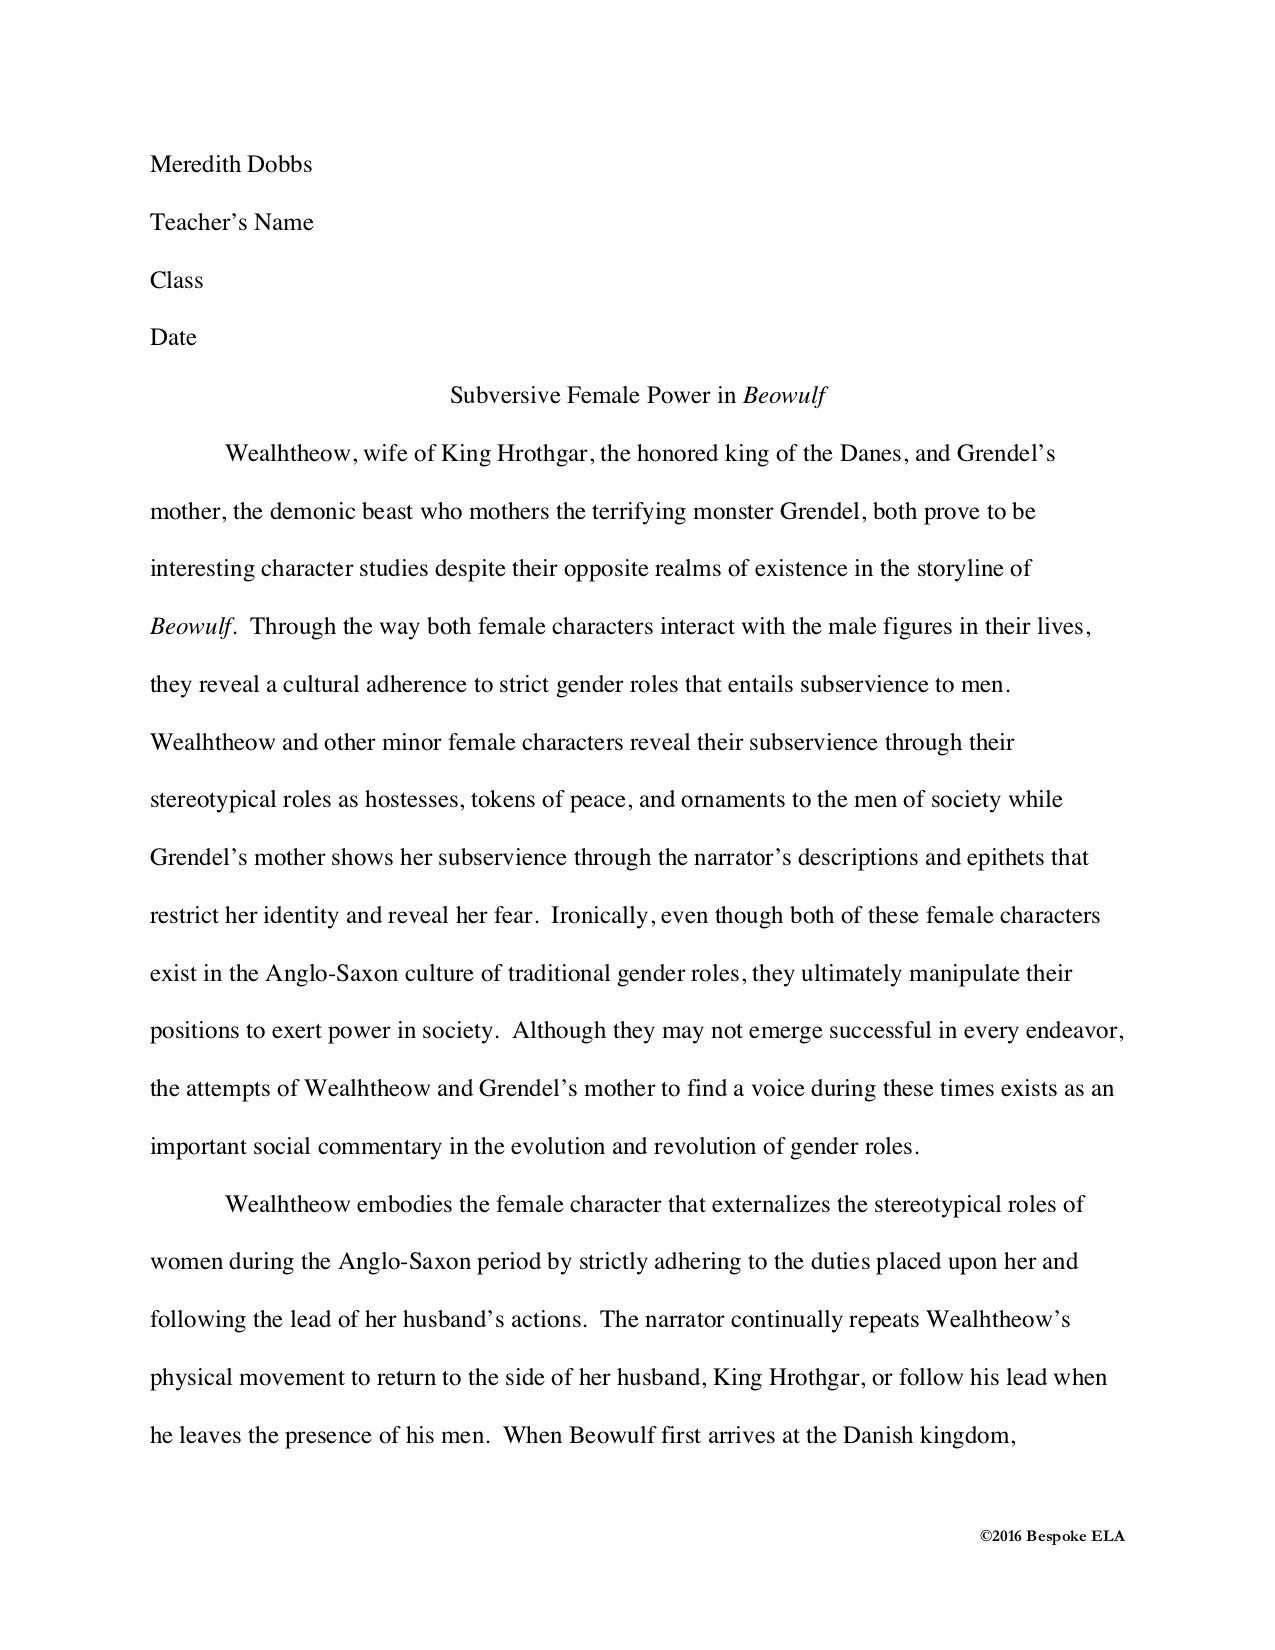 how to start a literary analysis essay